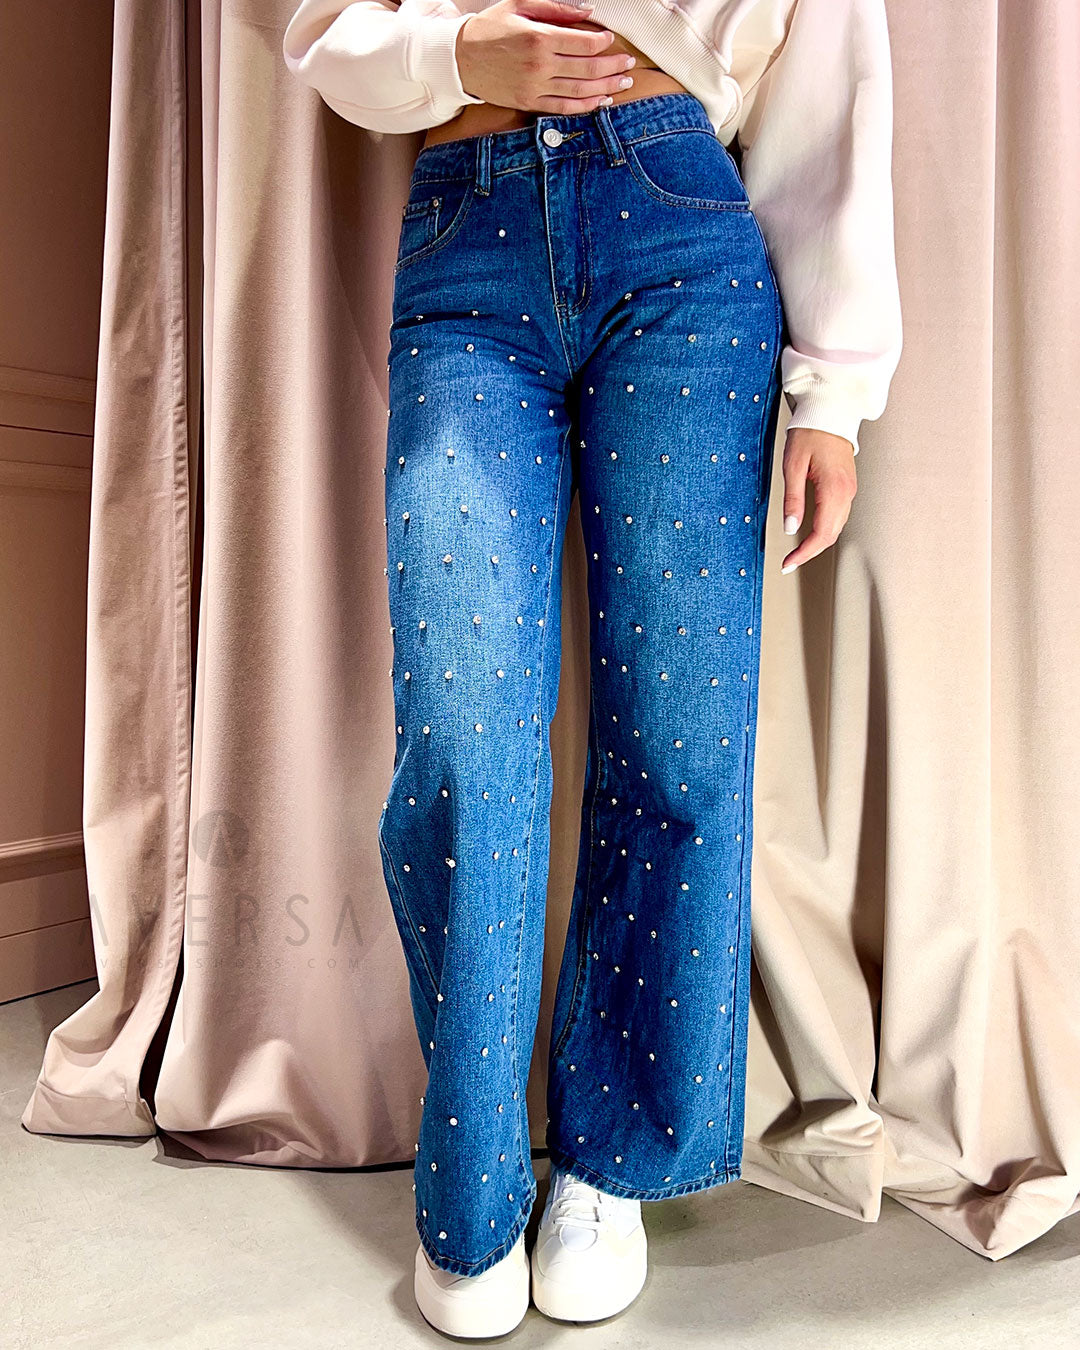 LM - Jeans Bolly con pietre